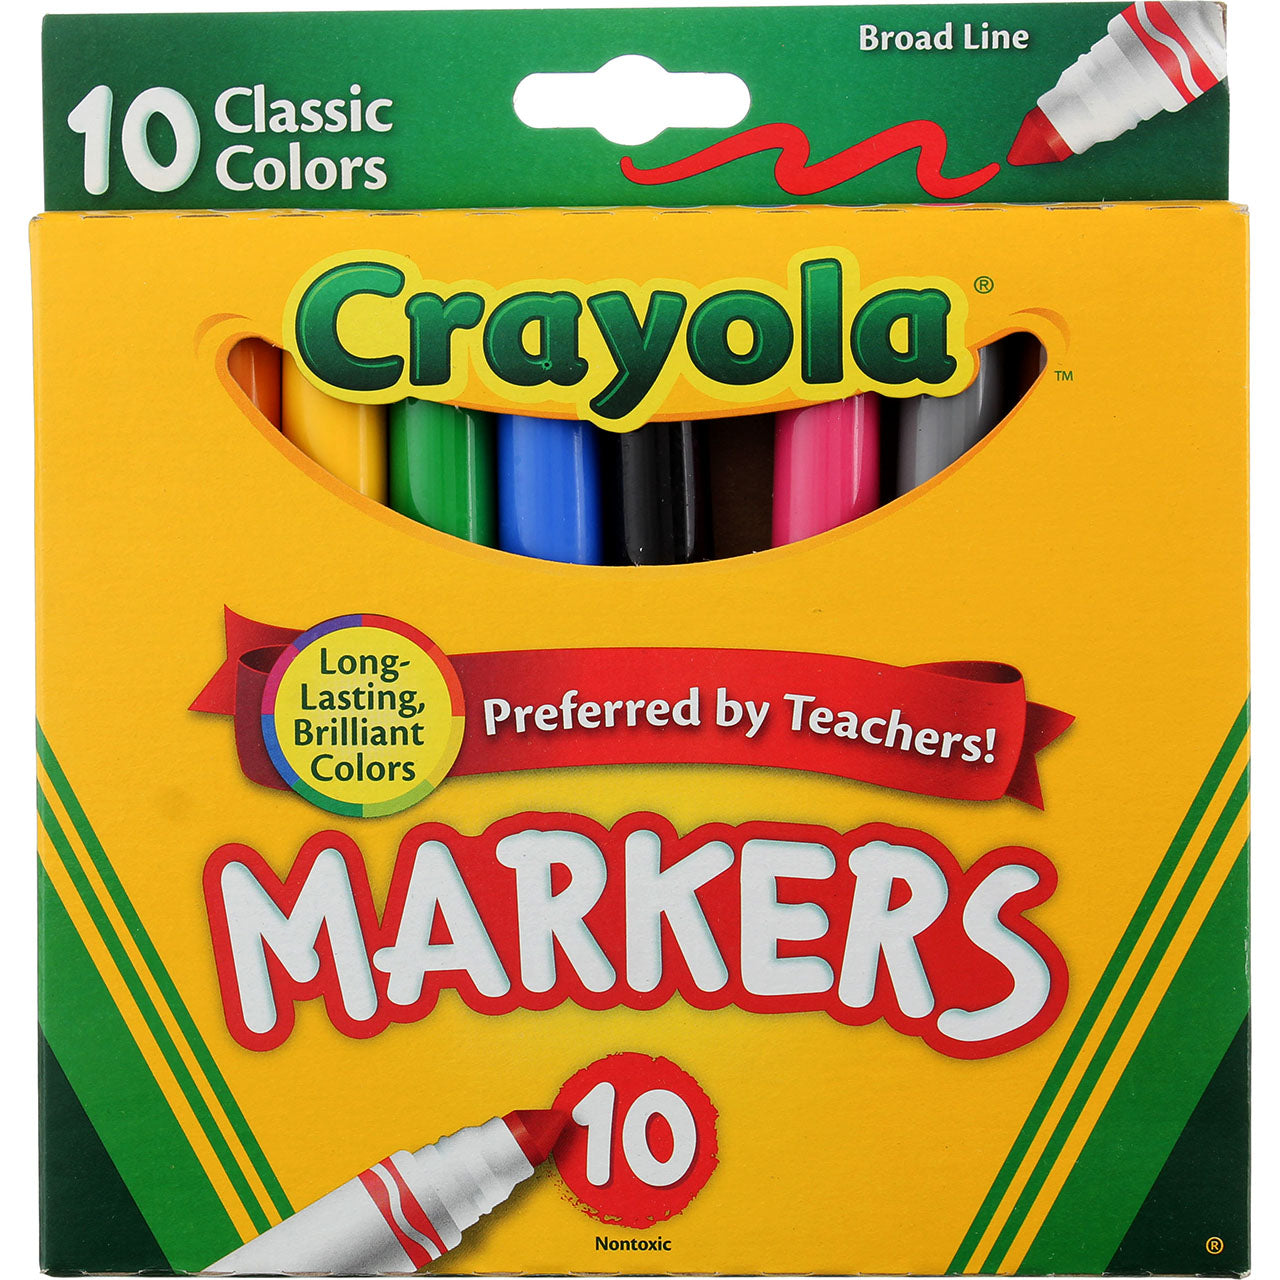 Crayola Ultra Clean Washable Broad Line Classic Markers, 10 ct